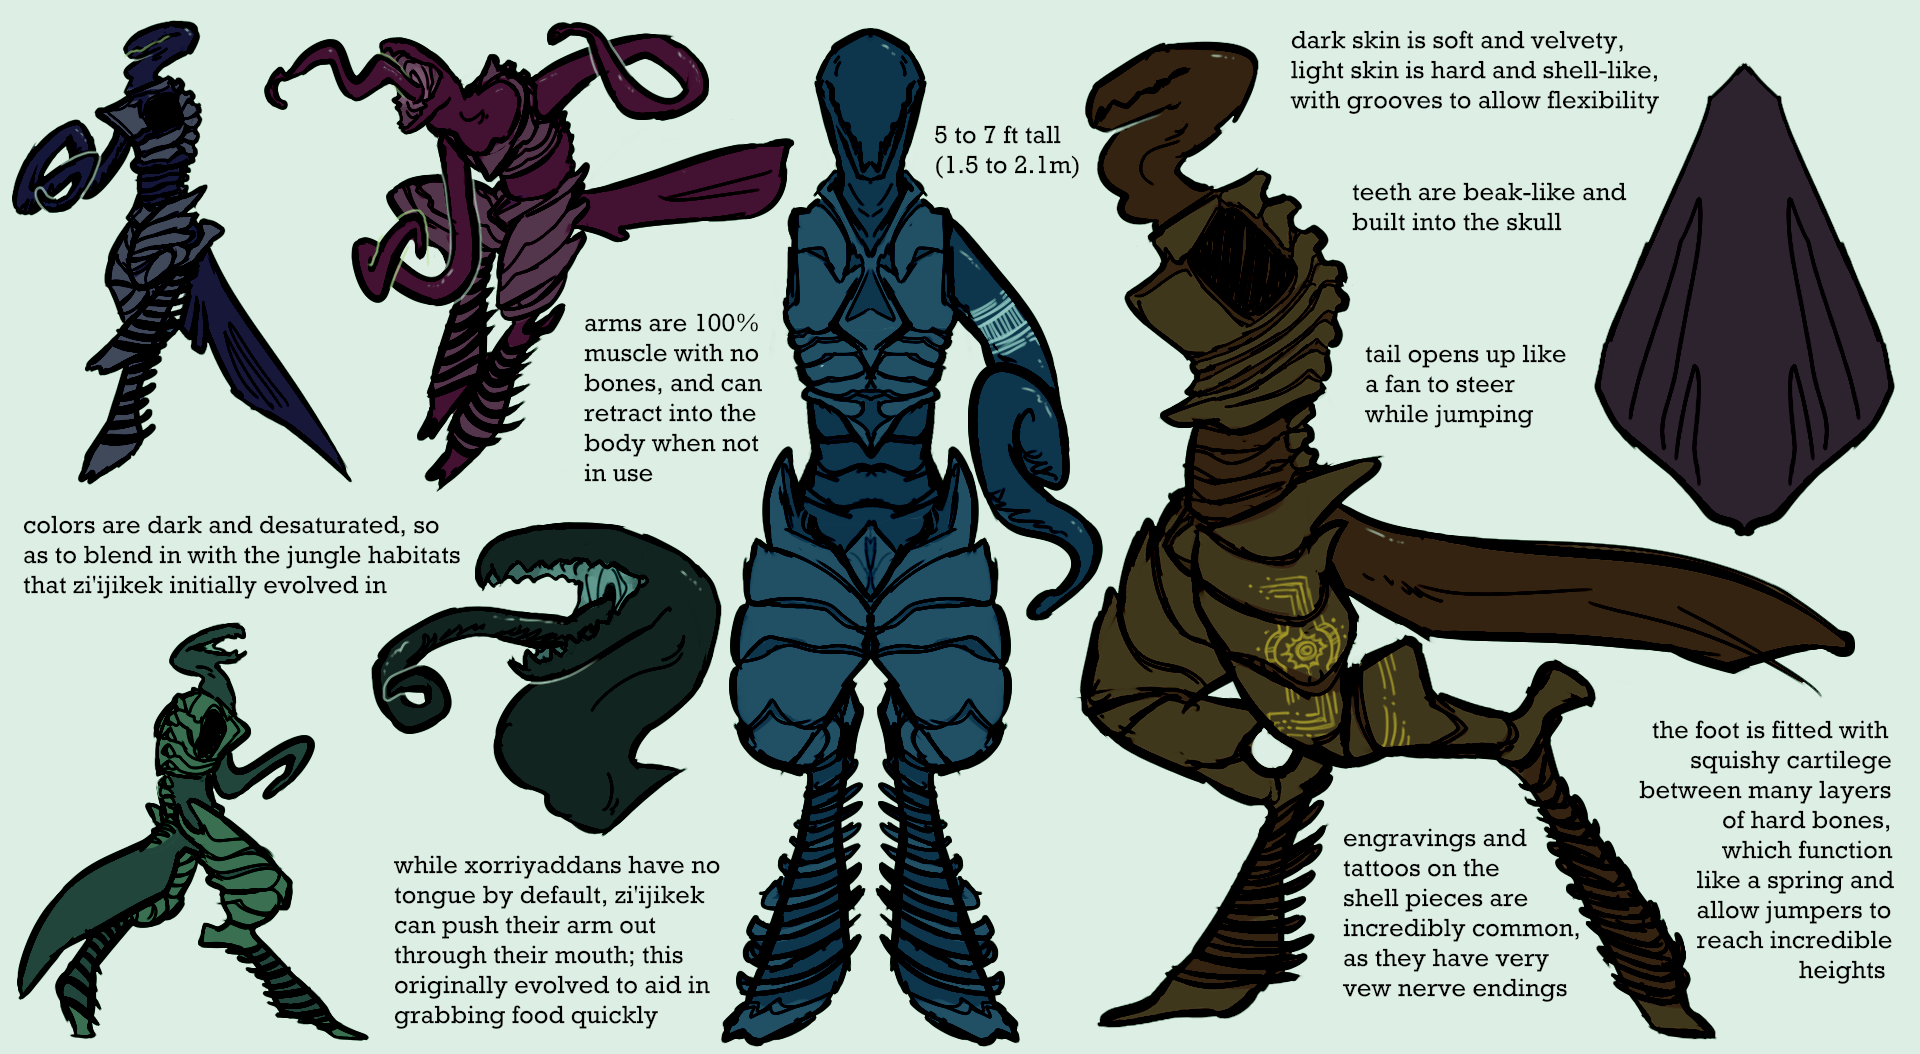 Zi'ijikek are tall, dark colored aliens. Colors are dark and desaturated, so as to blend in with the jungle habitats that zi'ijikek initially evolved in. Arms are 100% muscle with no bones, and can retract into the body when not in use. While Xorryaddans have no tongue by default, zi'ijikek can push their arm out through their mouth; this originally evolved to aid in grabbing food quickly. 5 ro 7 feet tall; 1.5 to 2.1 meters. Dark skin is soft and velvety, lighter armored bits are hard and shell-like, with grooves to allow flexibility. Teeth are beak-like and built into the skull. Tail opens up like a fan to steer while jumping. The foot is fitted with squishy cartilage between many layers of hard bone, which function like a spring and allow zi'ijikek to read incredible heights. Engravings and tattoos on the shell pieces are incredibly common, as they have very few nerve endings.